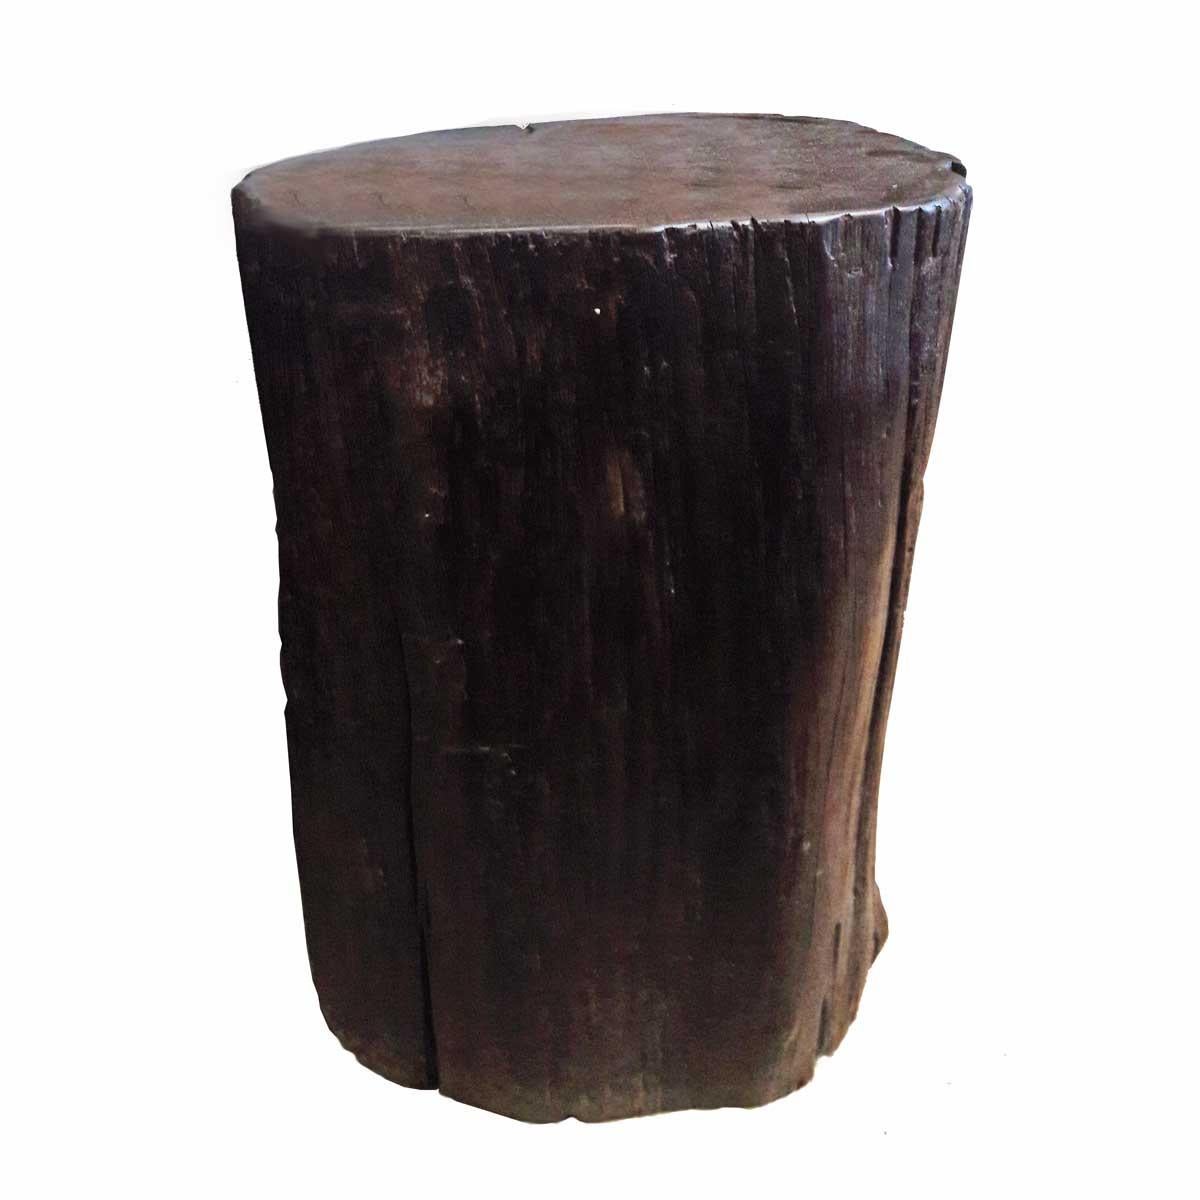 A solid teak tree trunk, in dark finish, handcrafted into an attractive side or end table. Can also be used as a stool for a rustic dining table. Ideal for outdoor or indoor spaces.